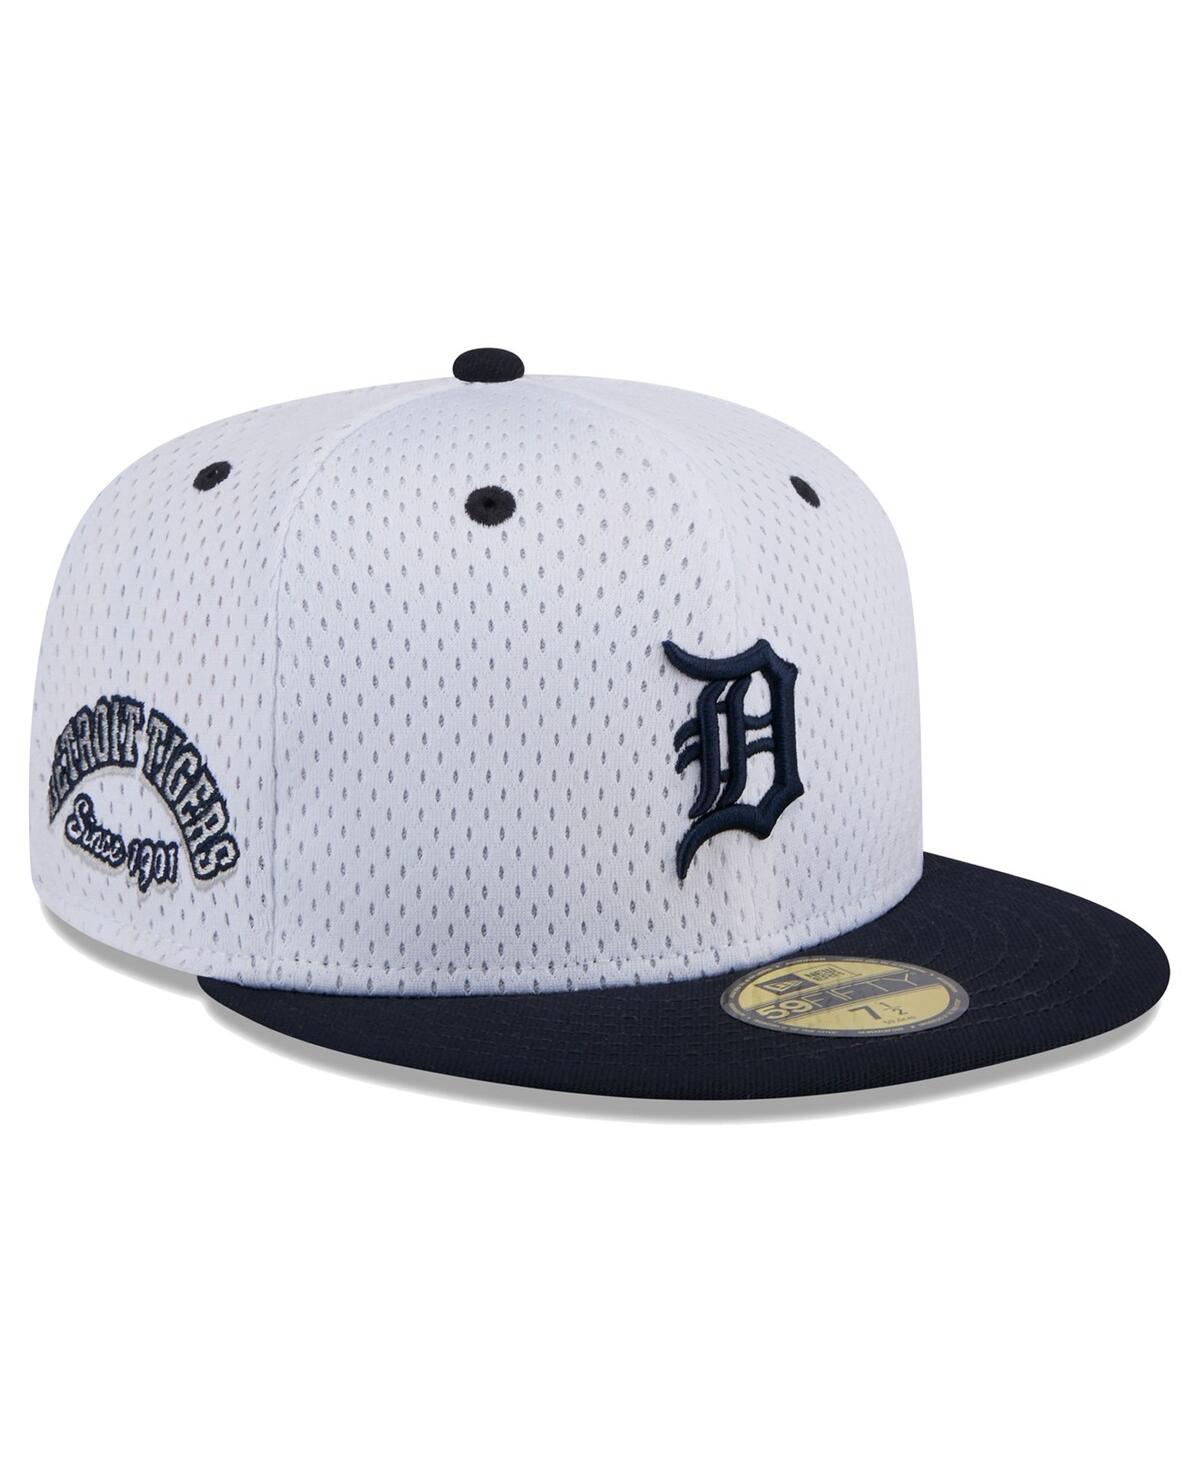 Men's White Detroit Tigers Throwback Mesh 59Fifty Fitted Hat - White Navy